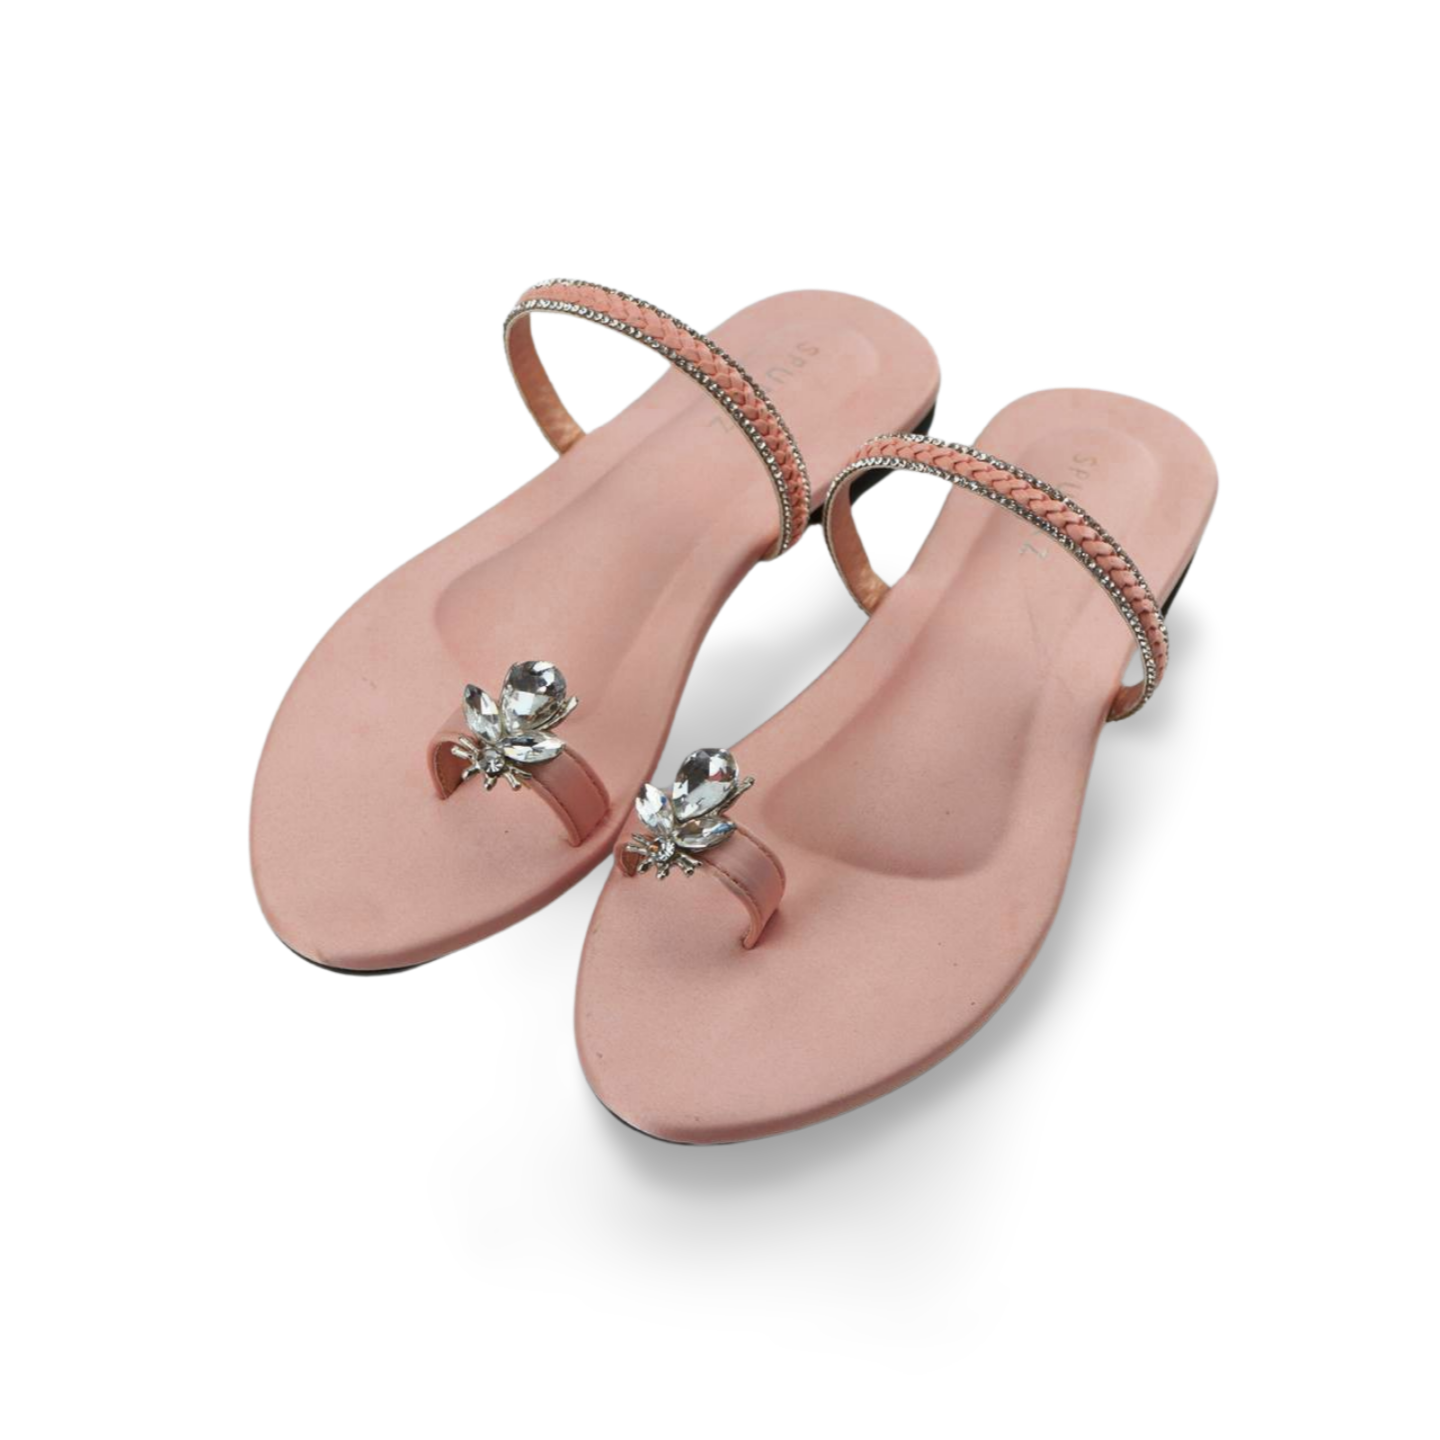 SPUNKZ Flat Sandals with Rhinestone Ankle Strap and Honeybee Buckle on Thumb